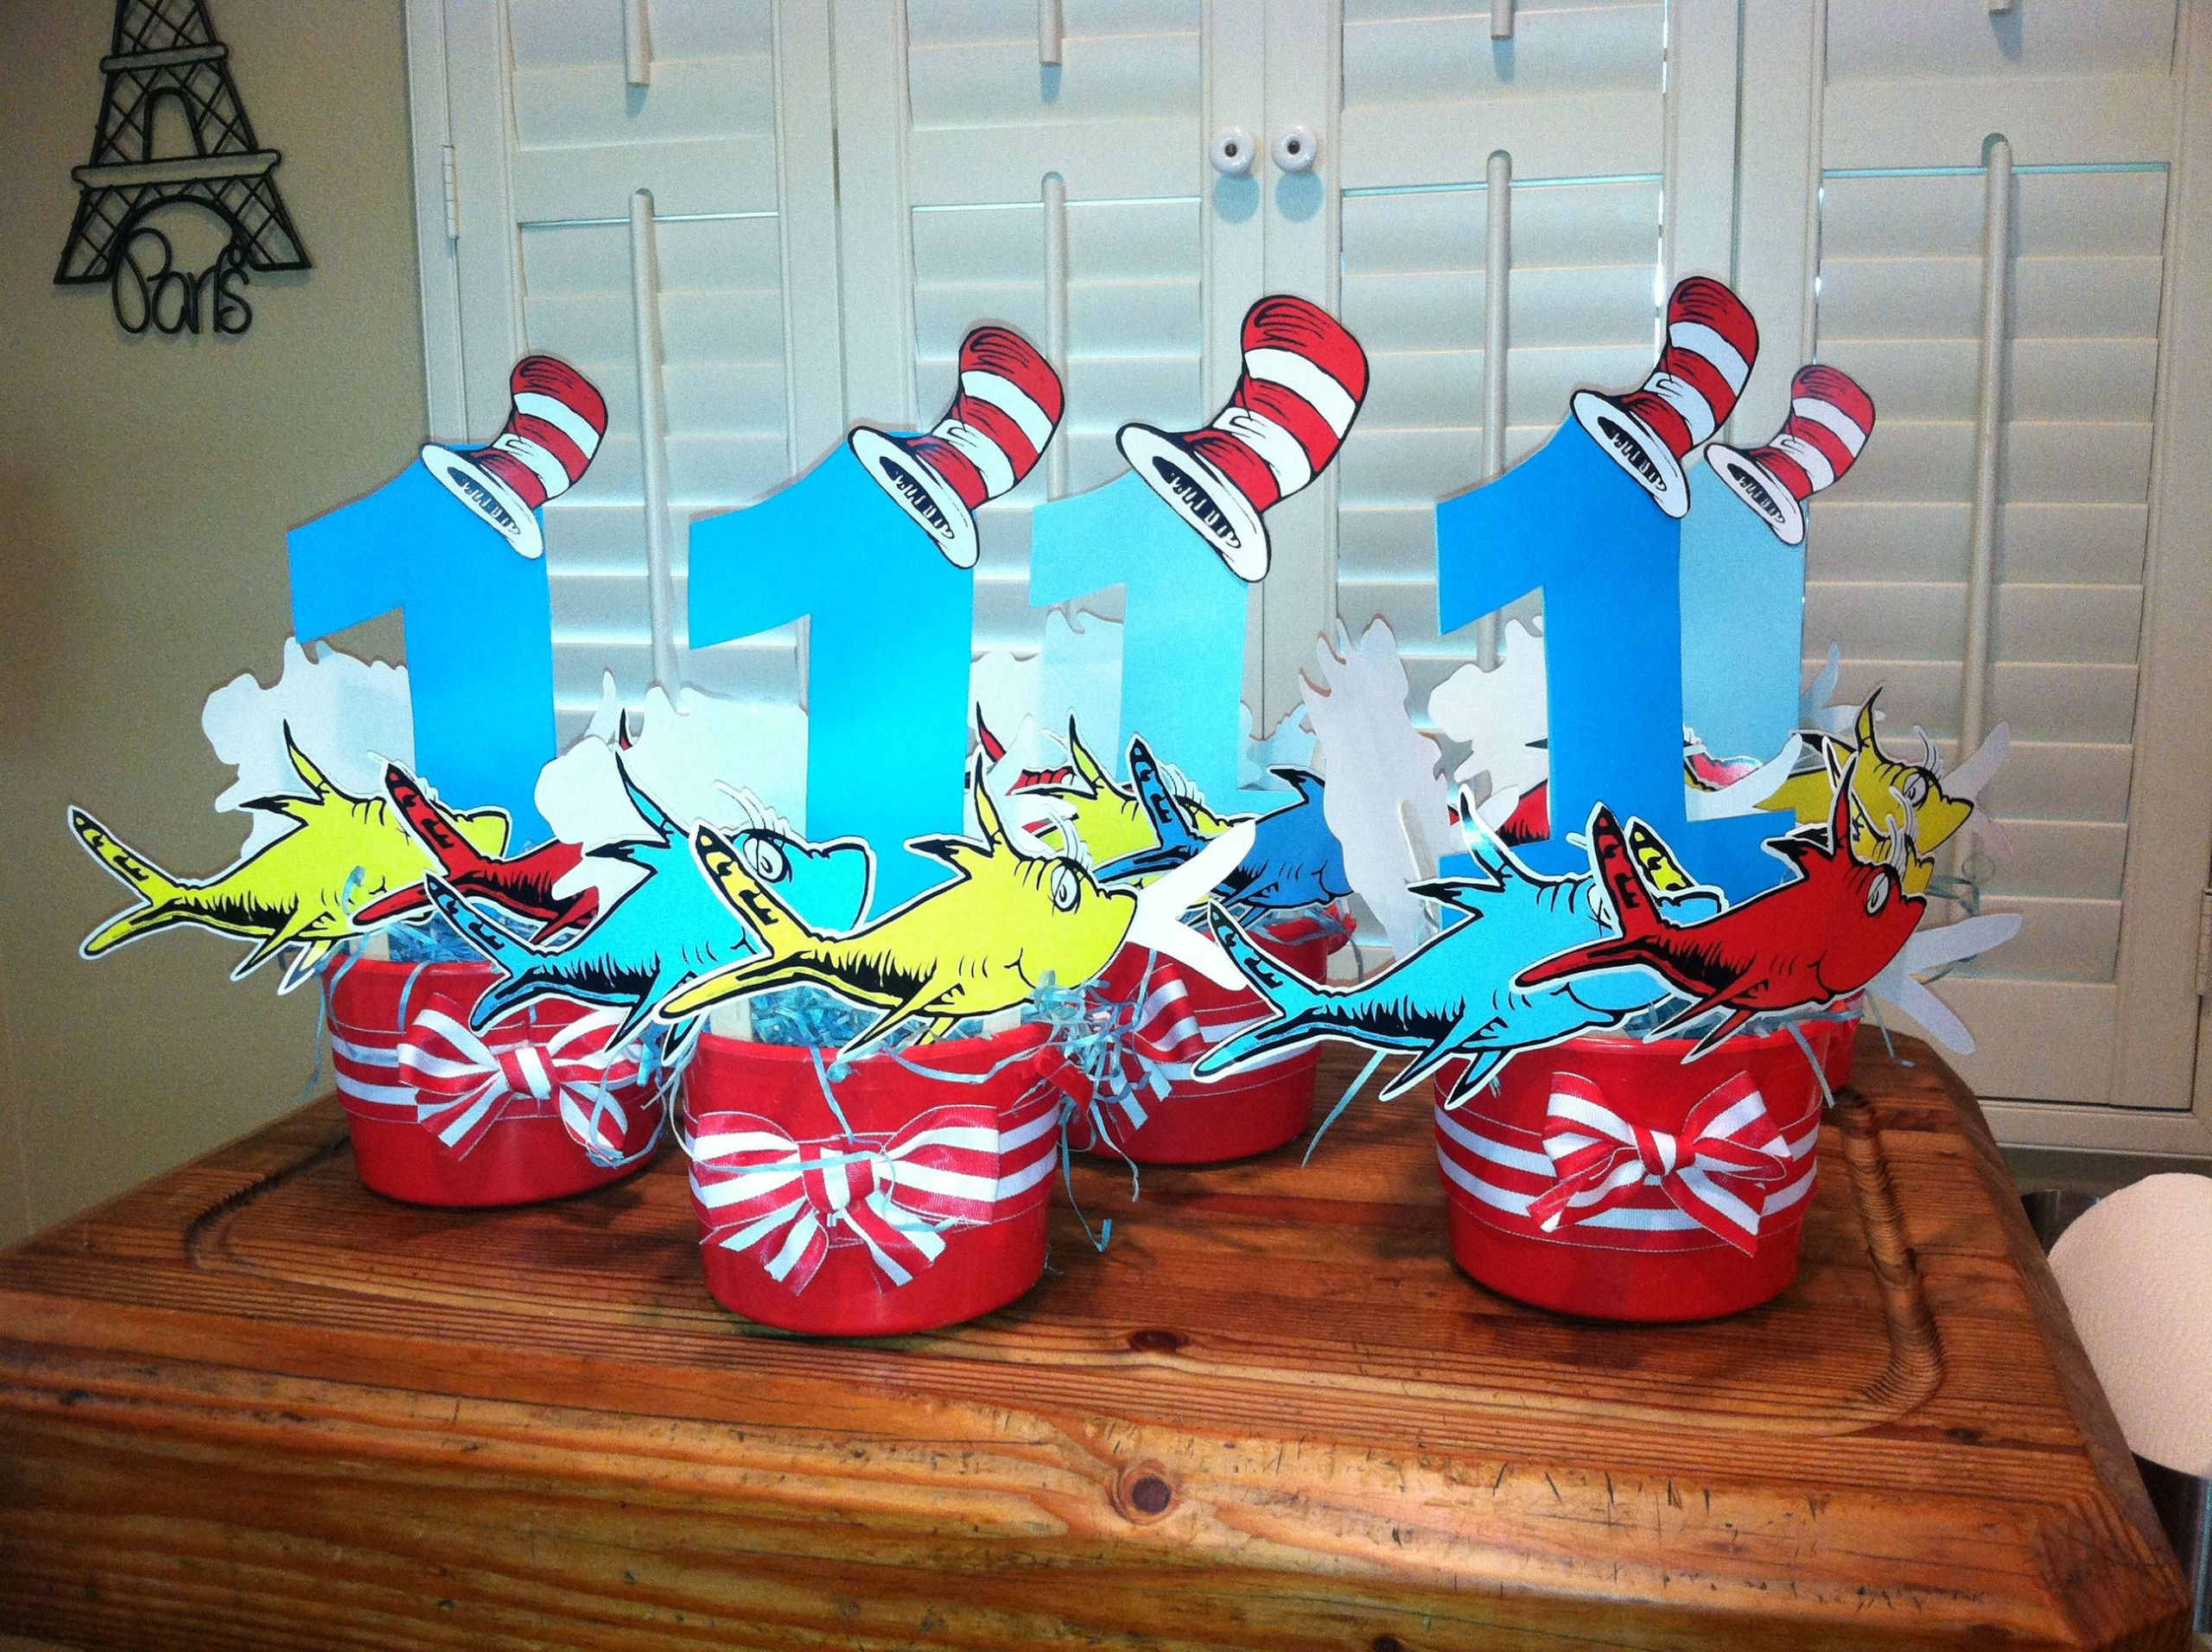 Dr Seuss 1st Birthday Party Decorations
 Dr Seuss themed centerpieces 1 cutouts with fish and